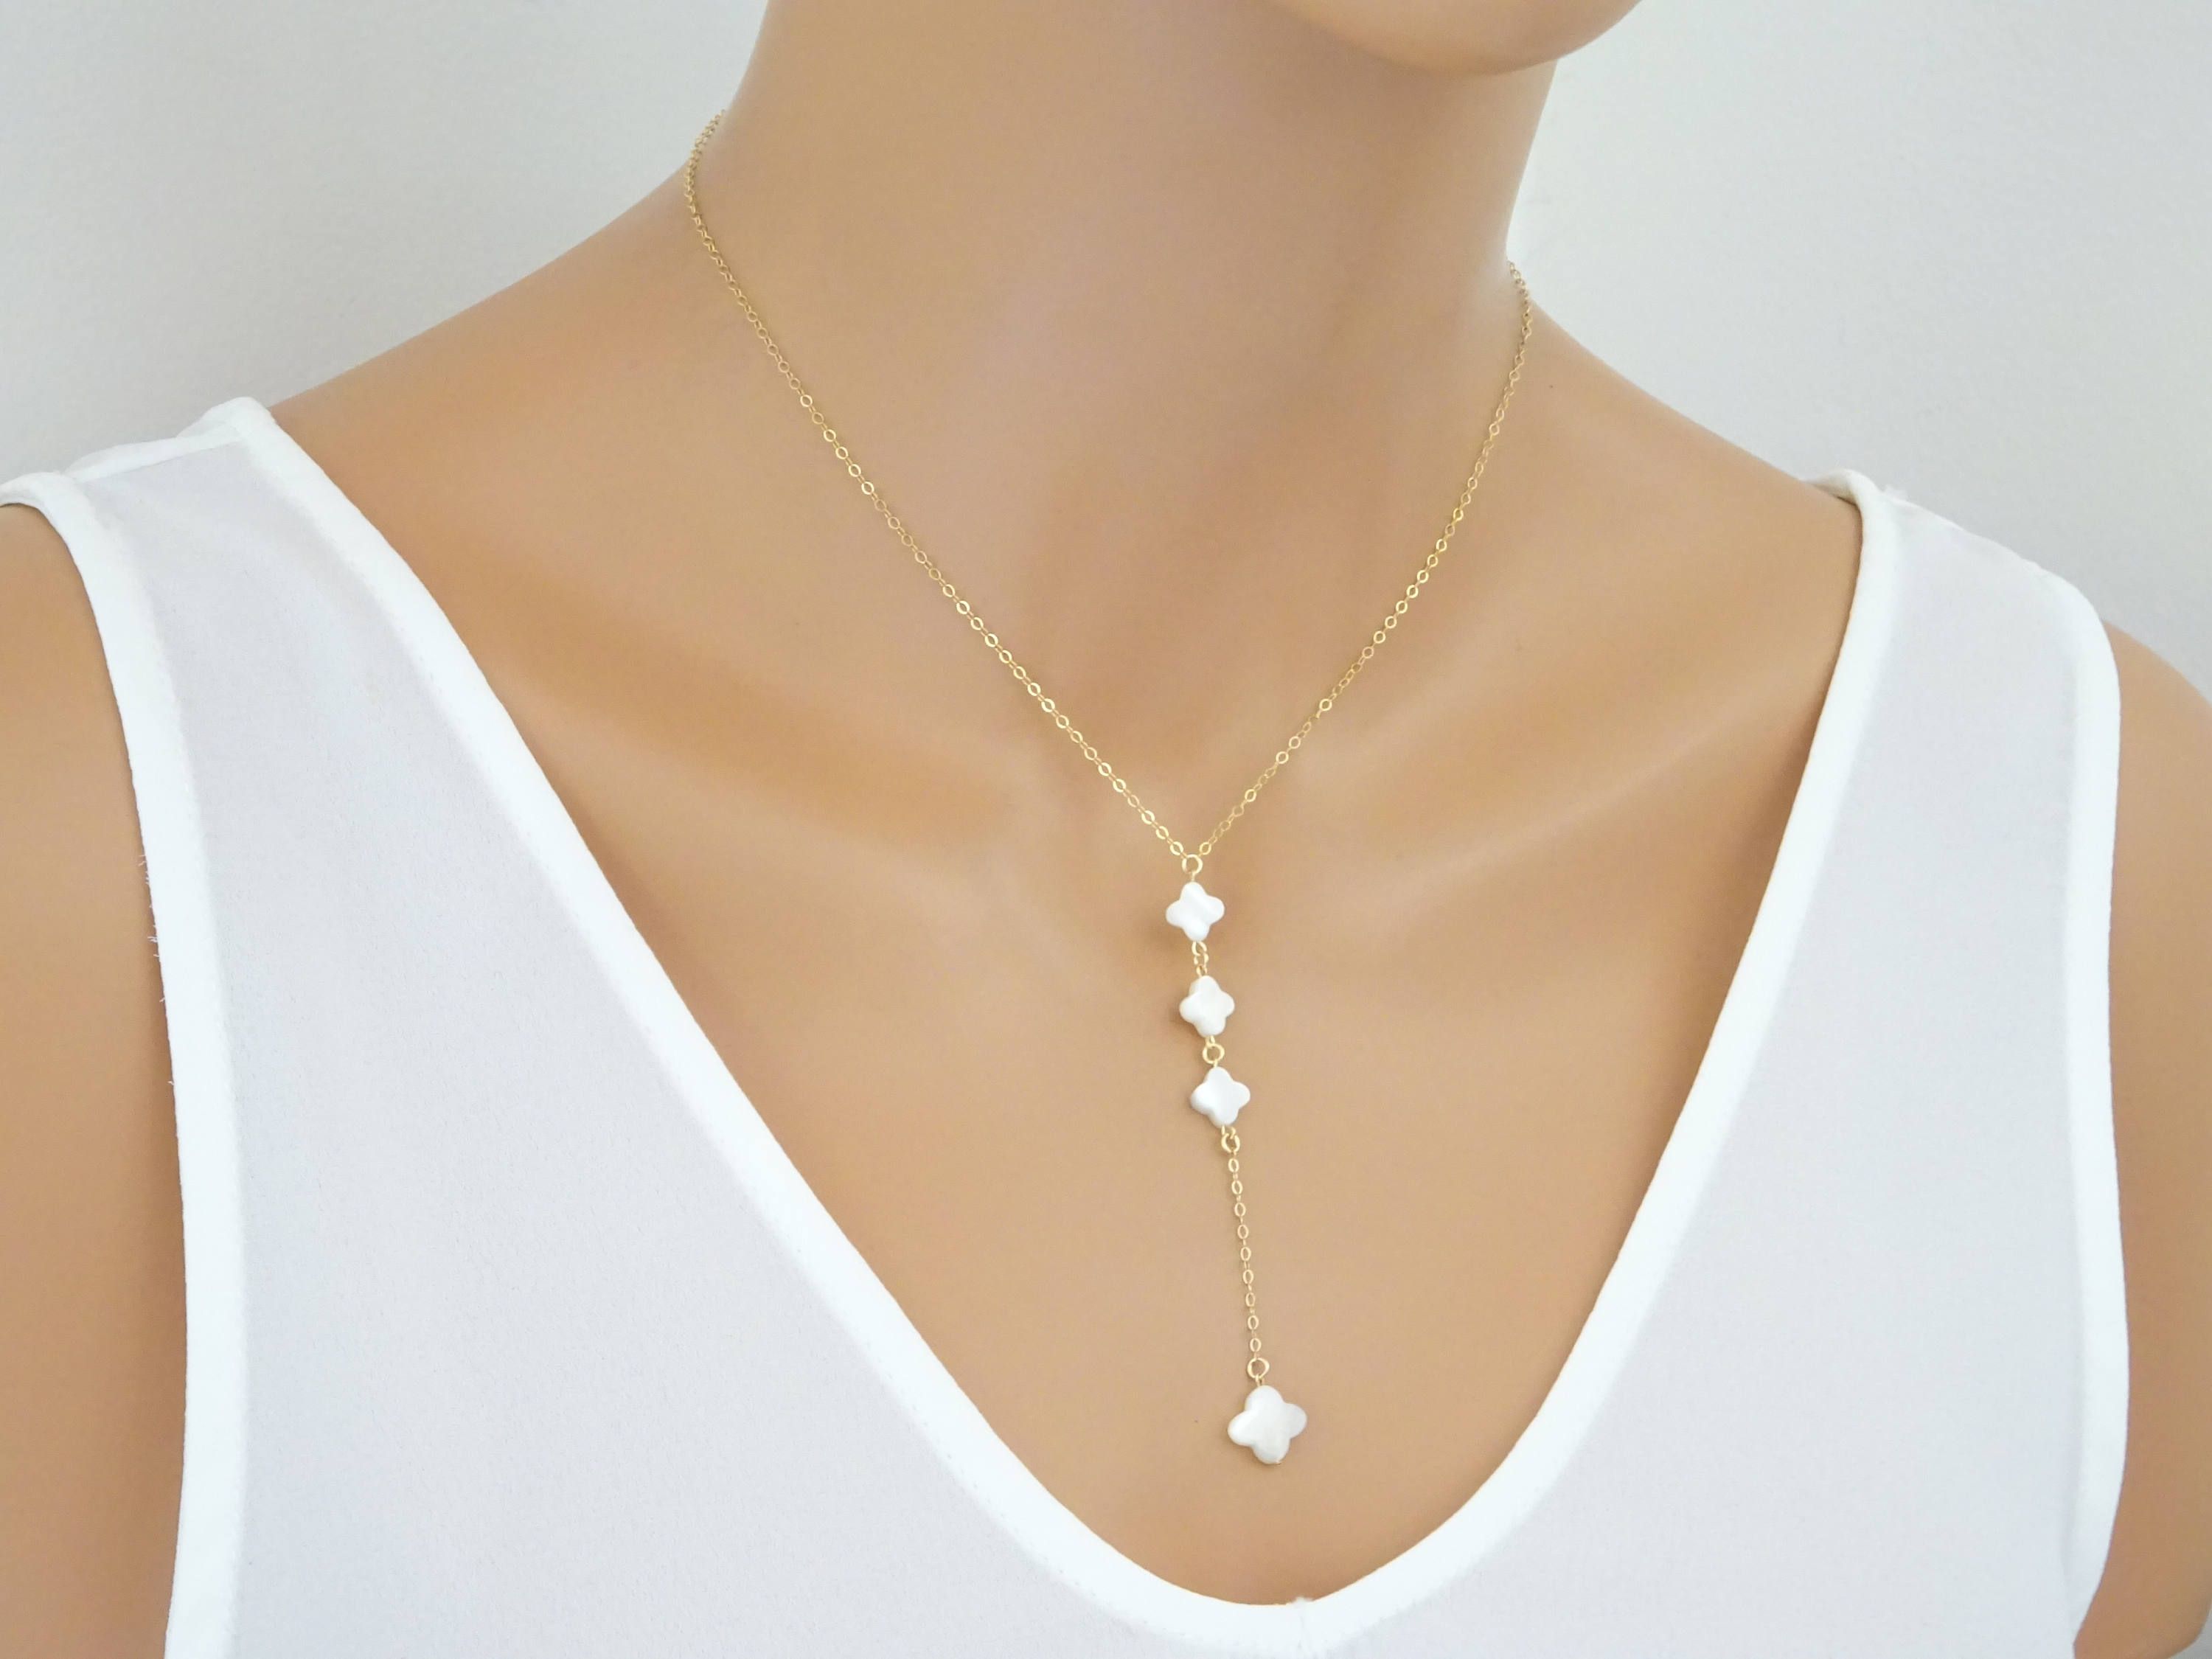 Clover Necklace, Lucky Clover Lariat Necklace, Good Luck Jewelry, Shamrock  Necklace, Four Leaf Clover Y Necklace, Bridesmaid Necklace Throughout 2019 Lucky Four Leaf Clover Y  Necklaces (View 4 of 25)